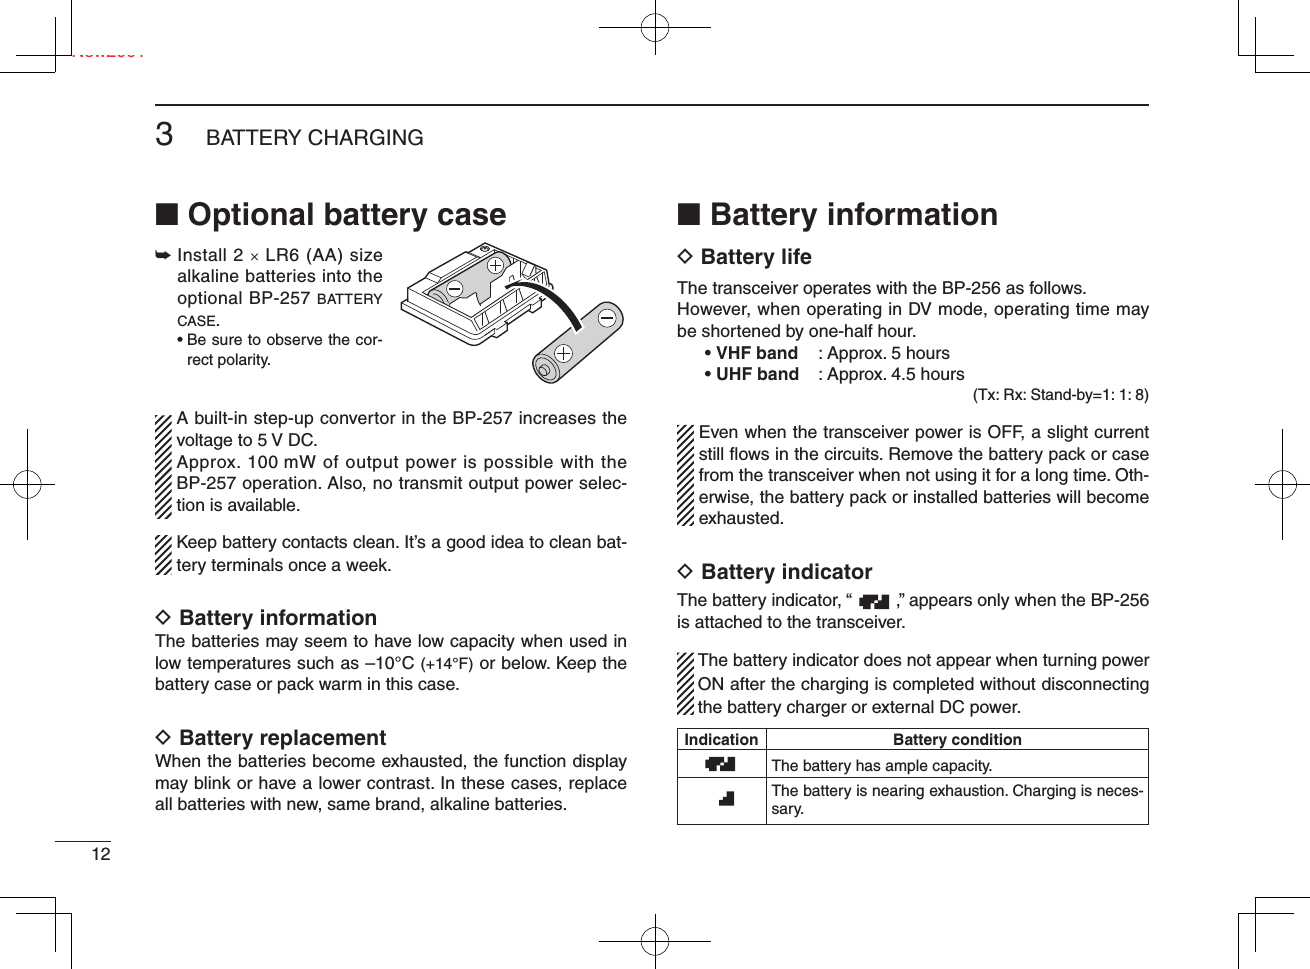 Ne123BATTERY CHARGINGNew2001■ Optional battery case➥  Install 2 u LR6 (AA) size alkaline batteries into the optional BP-257 BATTERY CASE. •  Be sure to observe the cor-rect polarity.  A built-in step-up convertor in the BP-257 increases the voltage to 5 V DC.  Approx. 100 mW of output power is possible with the BP-257 operation. Also, no transmit output power selec-tion is available.  Keep battery contacts clean. It’s a good idea to clean bat-tery terminals once a week.D Battery informationThe batteries may seem to have low capacity when used in low temperatures such as –10°C (+14°F) or below. Keep the battery case or pack warm in this case.D Battery replacementWhen the batteries become exhausted, the function display may blink or have a lower contrast. In these cases, replace all batteries with new, same brand, alkaline batteries.■ Battery informationD Battery lifeThe transceiver operates with the BP-256 as follows.However, when operating in DV mode, operating time may be shortened by one-half hour.• VHF band  : Approx. 5 hours• UHF band  : Approx. 4.5 hours(Tx: Rx: Stand-by=1: 1: 8)  Even when the transceiver power is OFF, a slight current still ﬂ ows in the circuits. Remove the battery pack or case from the transceiver when not using it for a long time. Oth-erwise, the battery pack or installed batteries will become exhausted.D Battery indicator The battery indicator, “         ,” appears only when the BP-256 is attached to the transceiver.  The battery indicator does not appear when turning power ON after the charging is completed without disconnecting the battery charger or external DC power. Indication  Battery  condition  The battery has ample capacity.    The battery is nearing exhaustion. Charging is neces-sary.